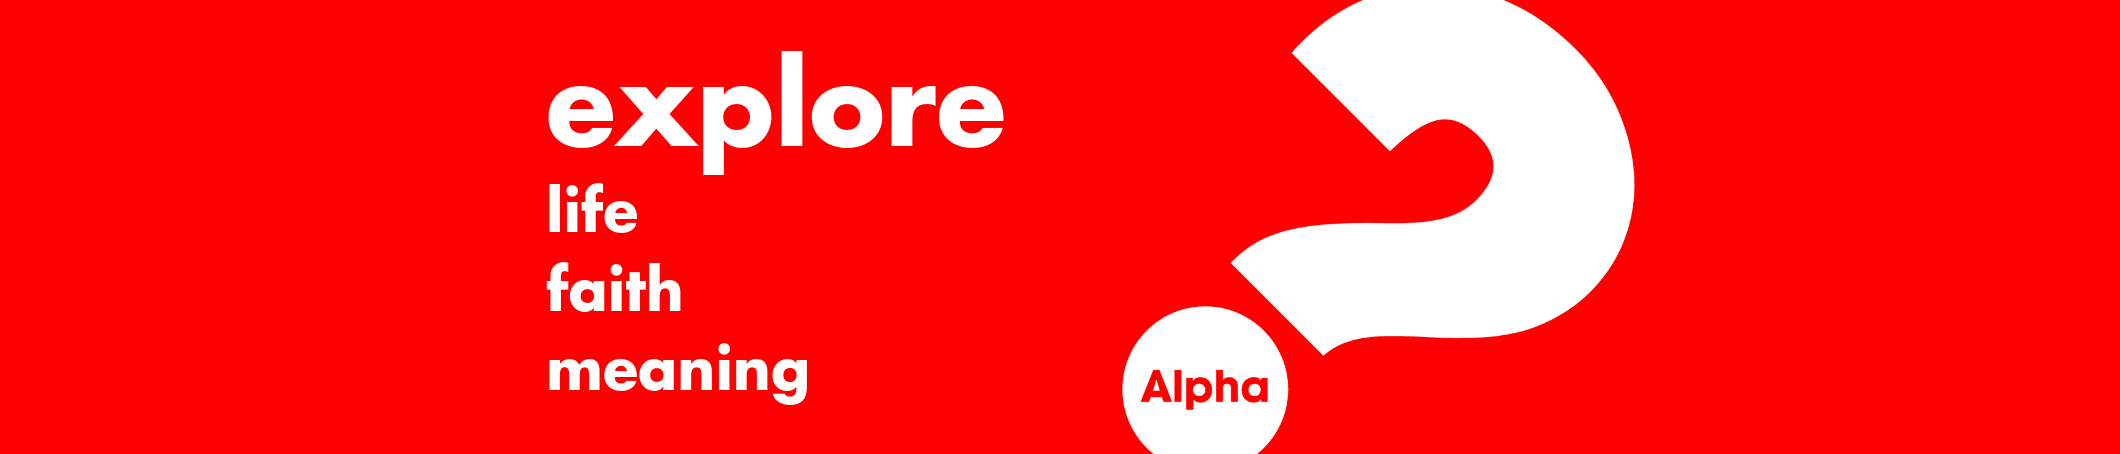 red background - alpha question mark logo - to the left the words 'explore, life, faith, meaning'